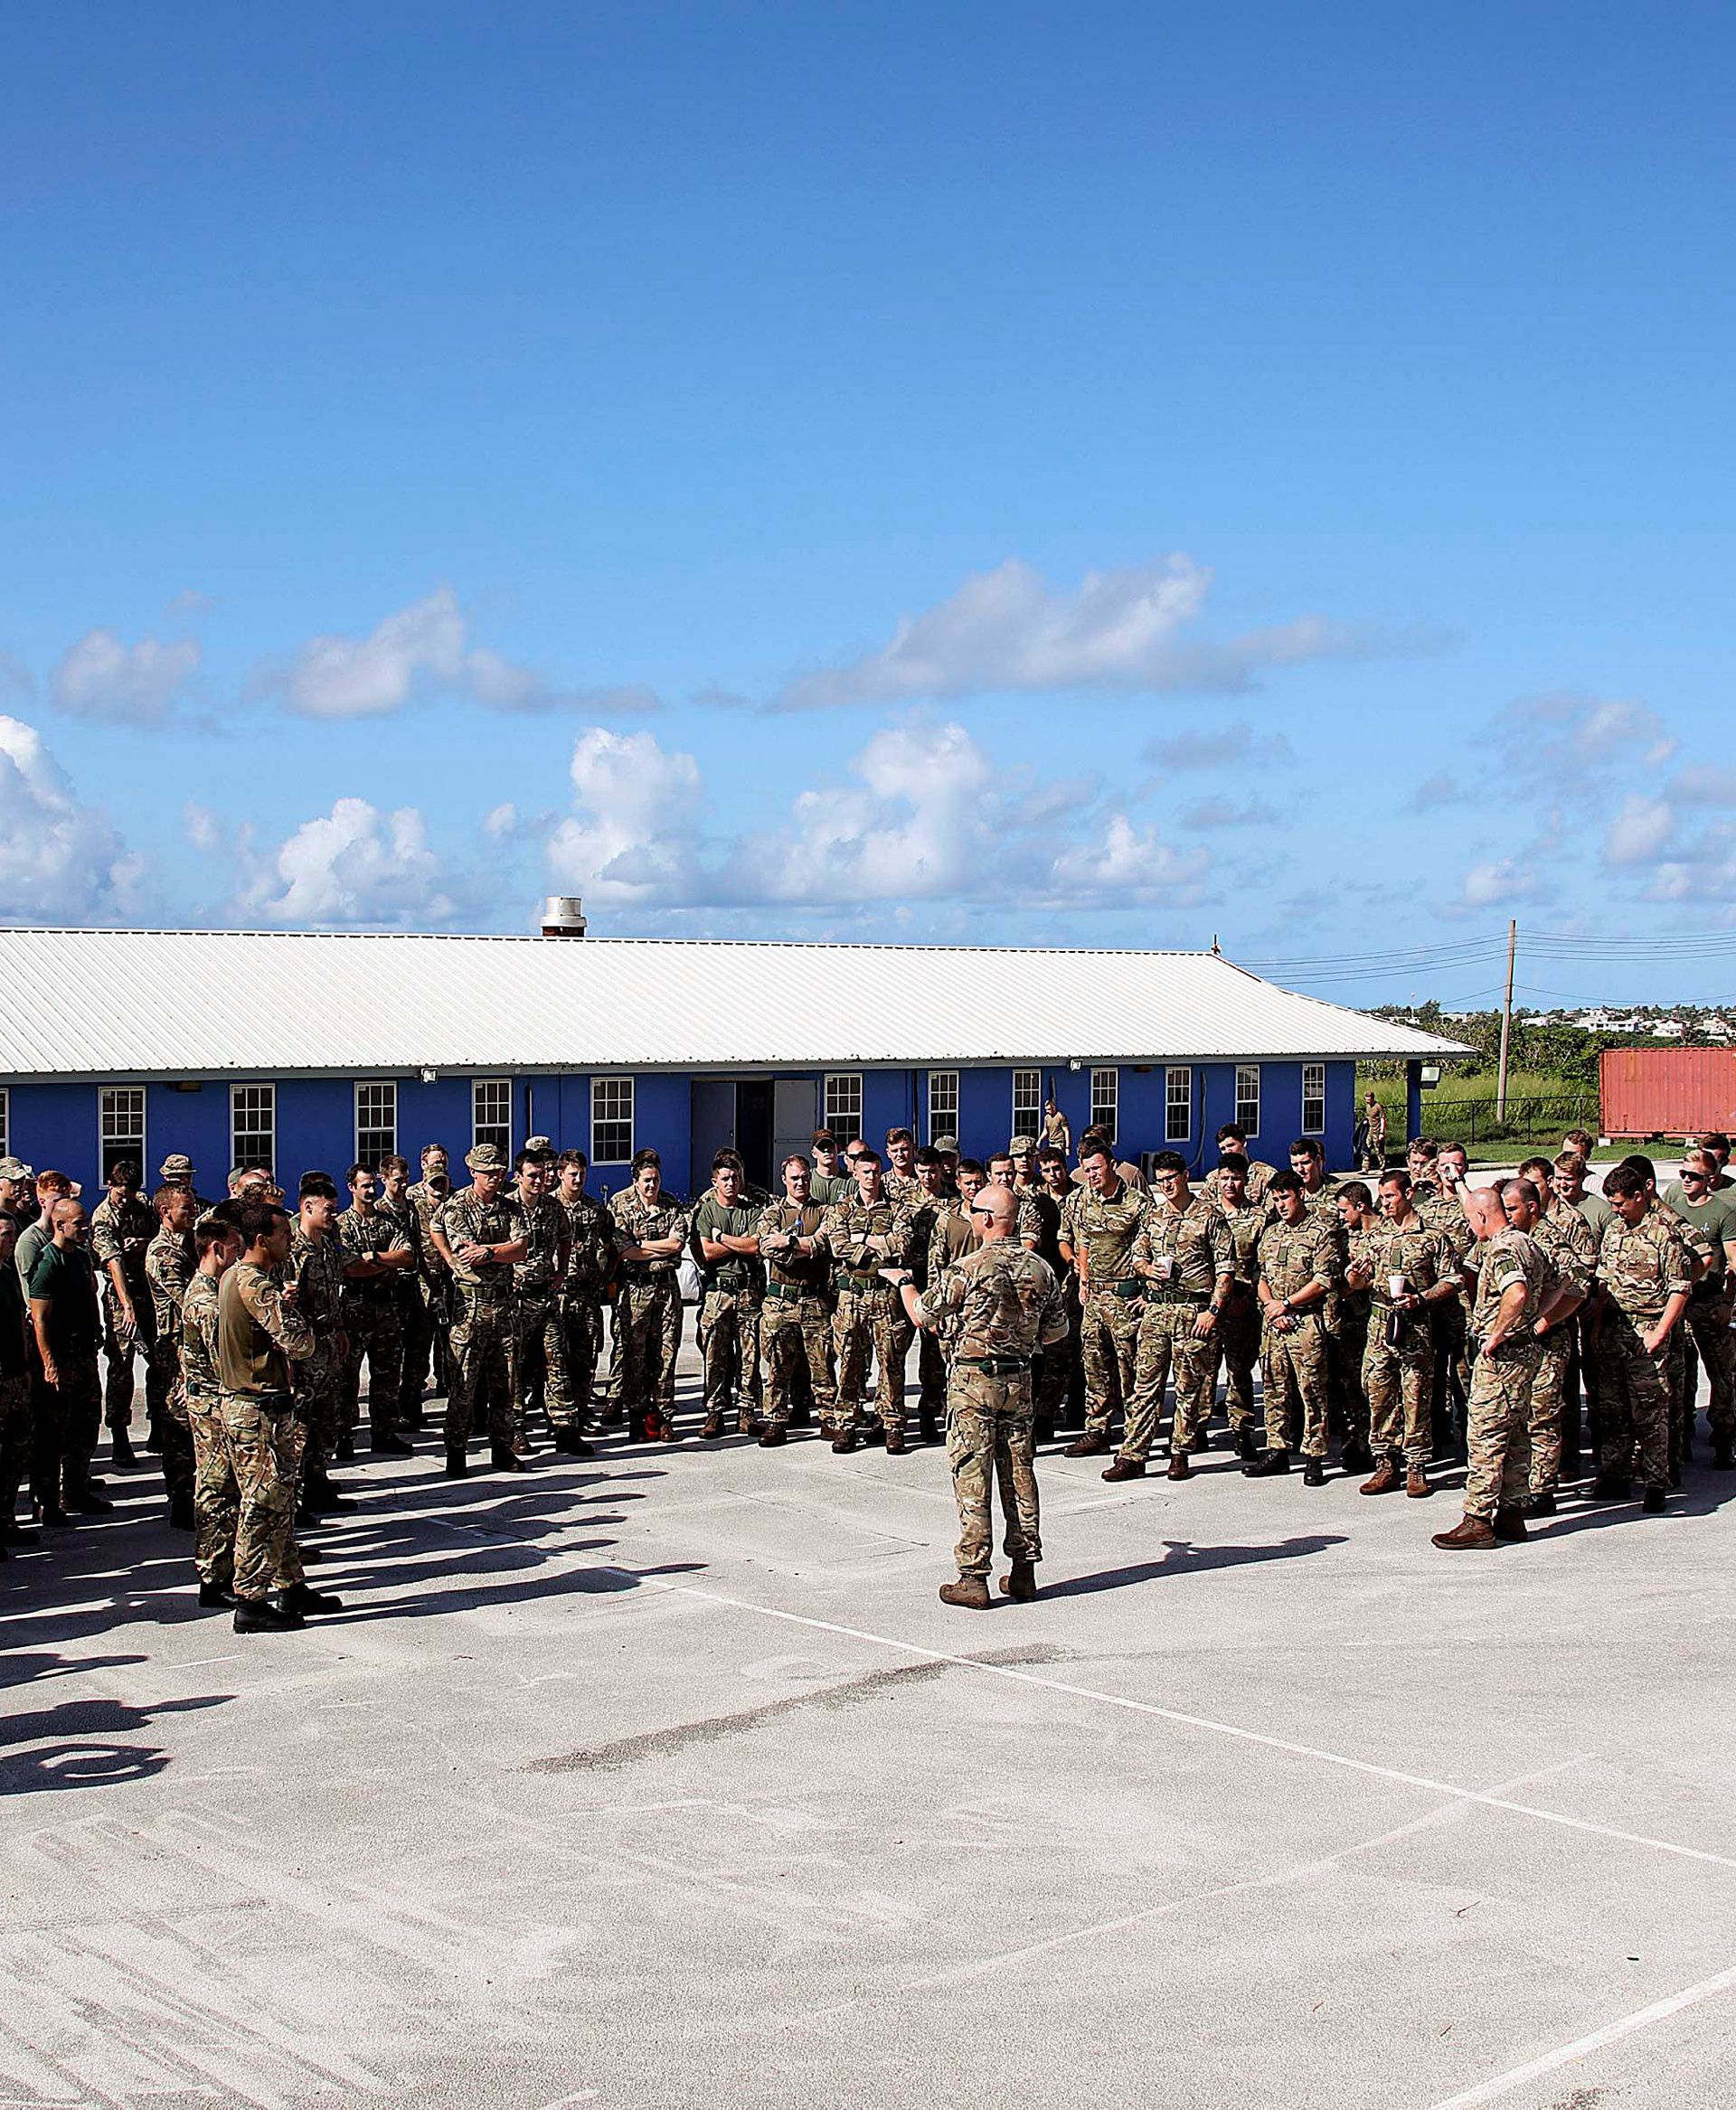 Members of Alpha Company, 40 Commando Royal Marines, are briefed in Barbados before traveling to the British Virgin Islands to help provide humanitarian assistance, in Barbados